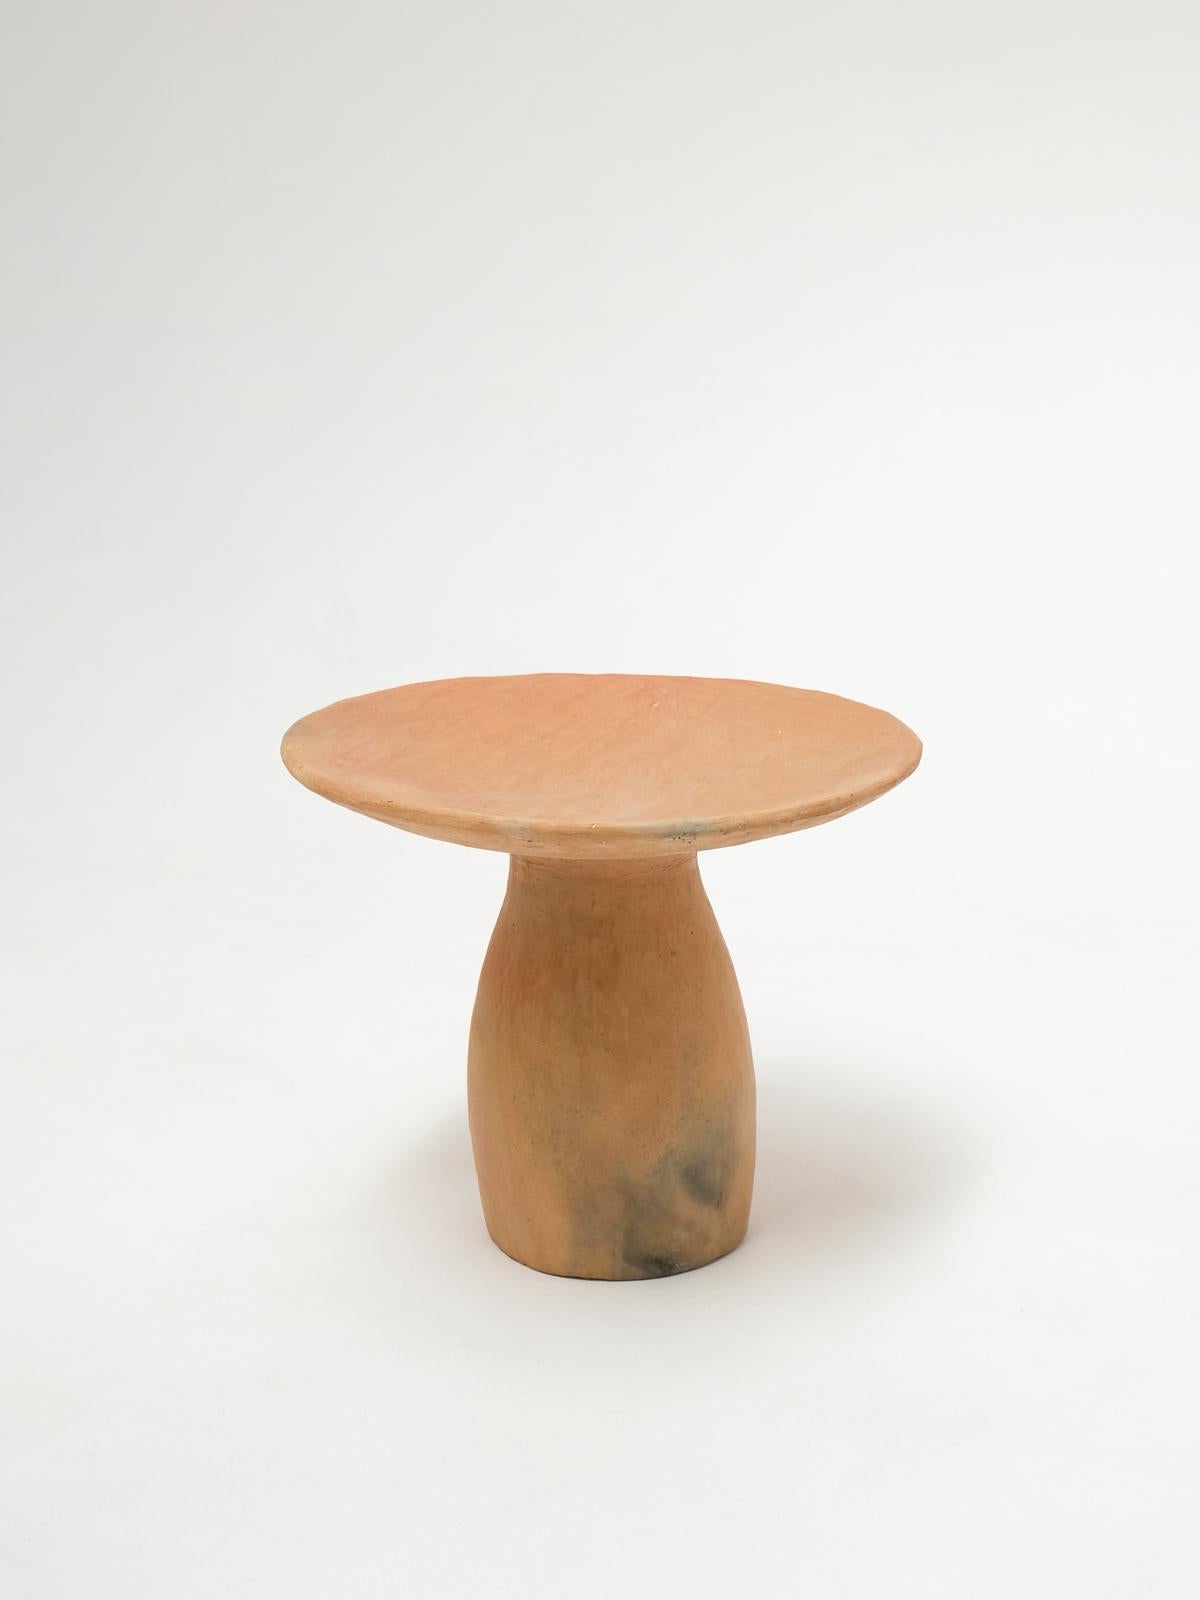 - Handbuilt terracotta big side table, stool for bedroom or living room
- made of clay collected from the potter's surroundings.
- made in the Moroccan Rif mountains by the potter Houda.
- co-created by the potter Houda x memòri team

Approximate